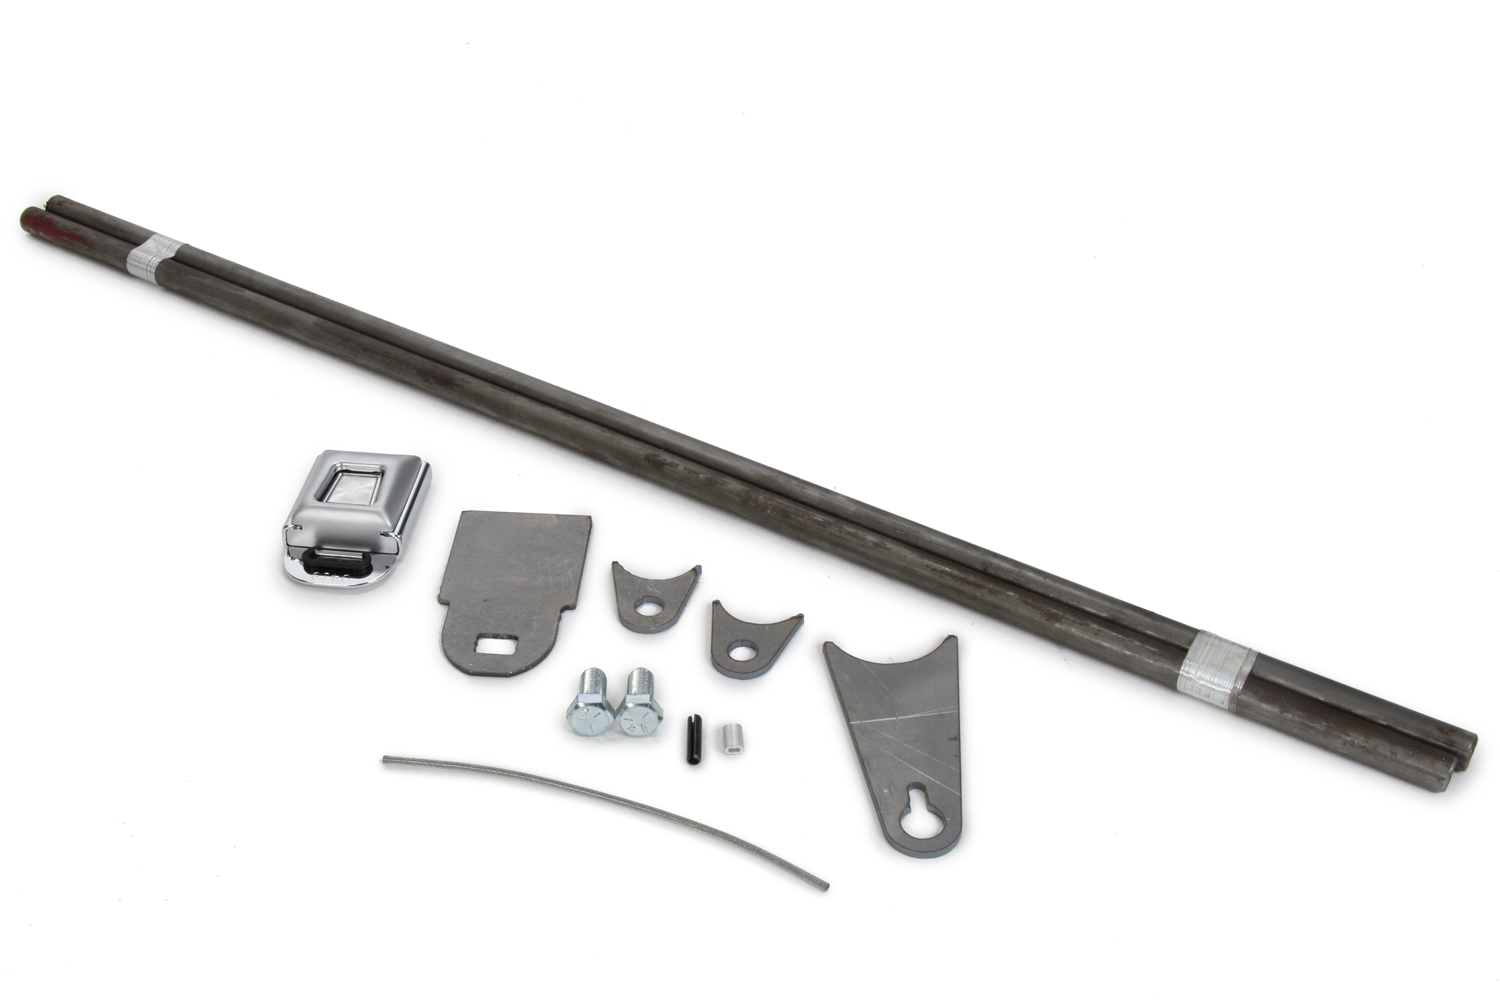 Chassis Engineering 4033 Window Net Installation Kit, Buckle Style, Hardware Included, Steel, Natural, Kit